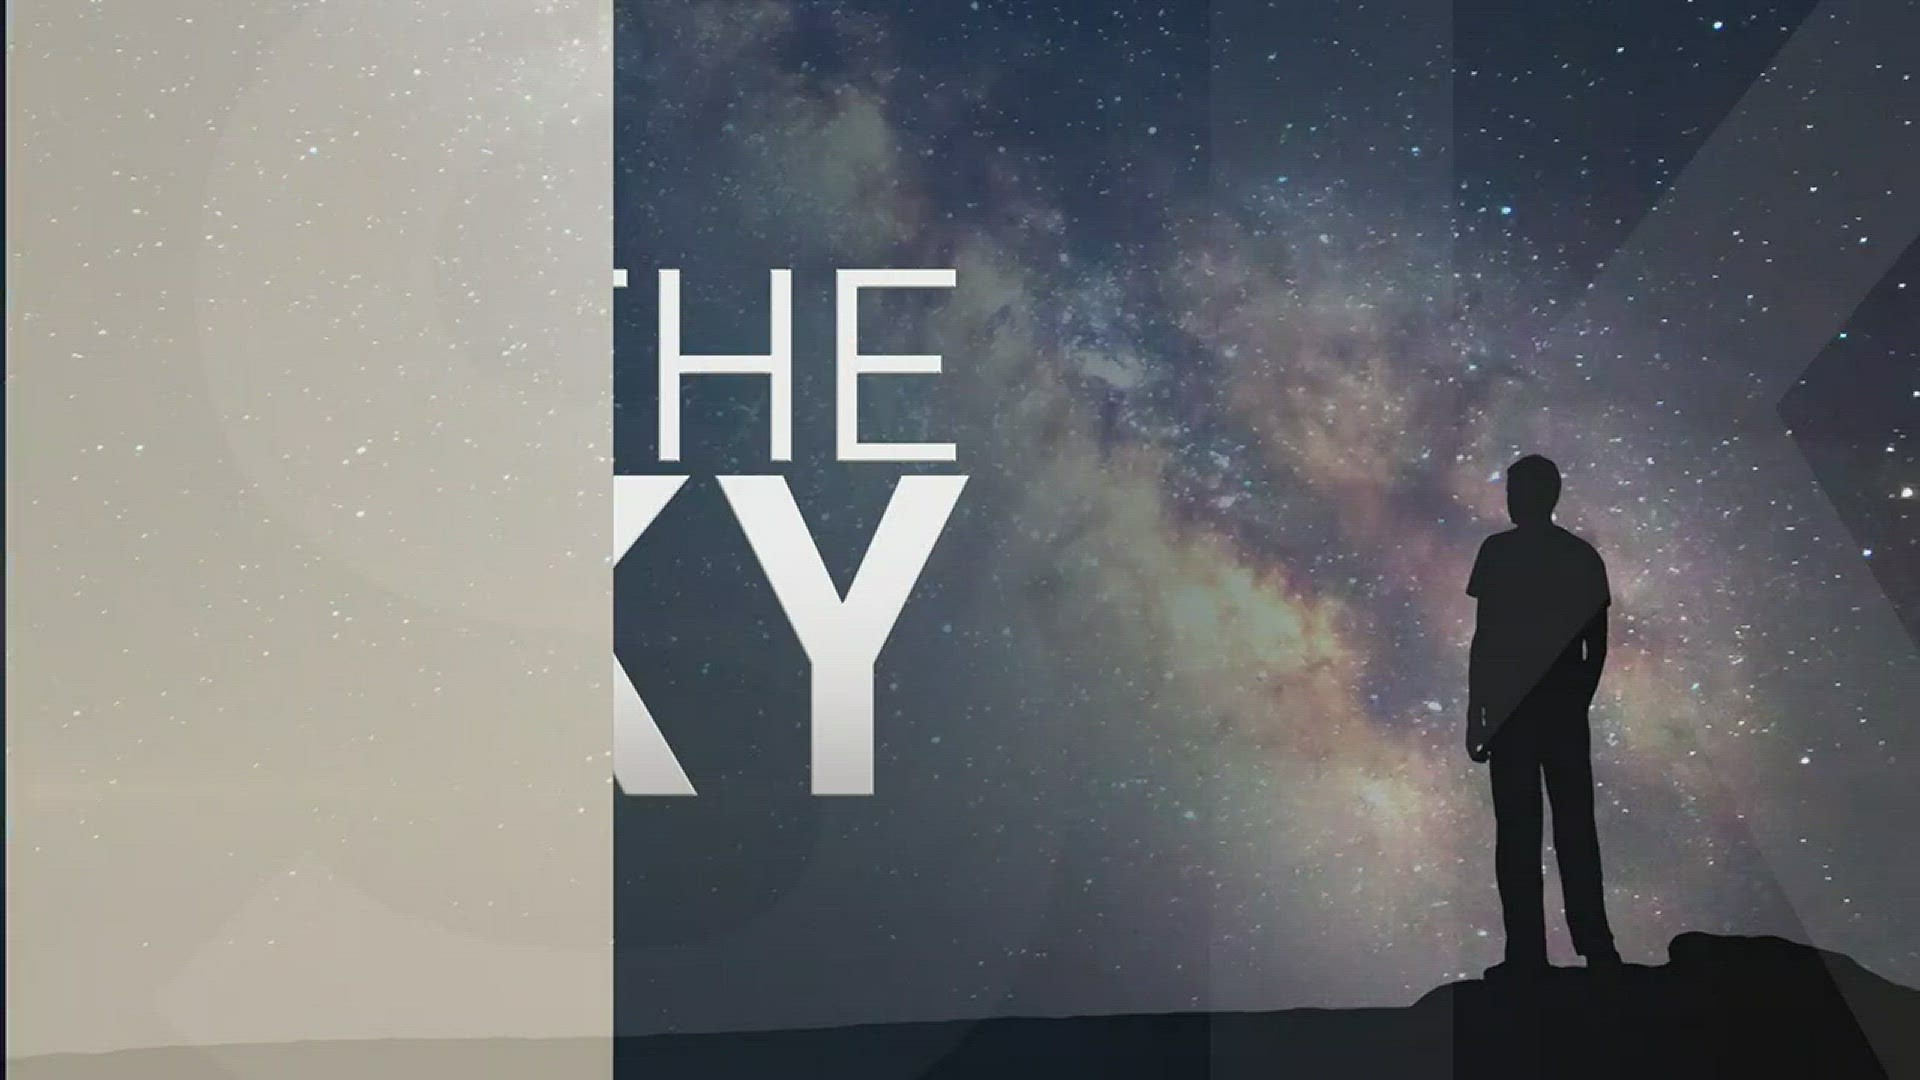 WATCH | This month's edition of "In the Sky" will have you looking up to see what's in the heavens above with Cleveland State research astronomer Jay Reynolds (@reynoldsastro) and Gale Franko of the Cuyahoga Astronomical Association. #inthesky #3weather